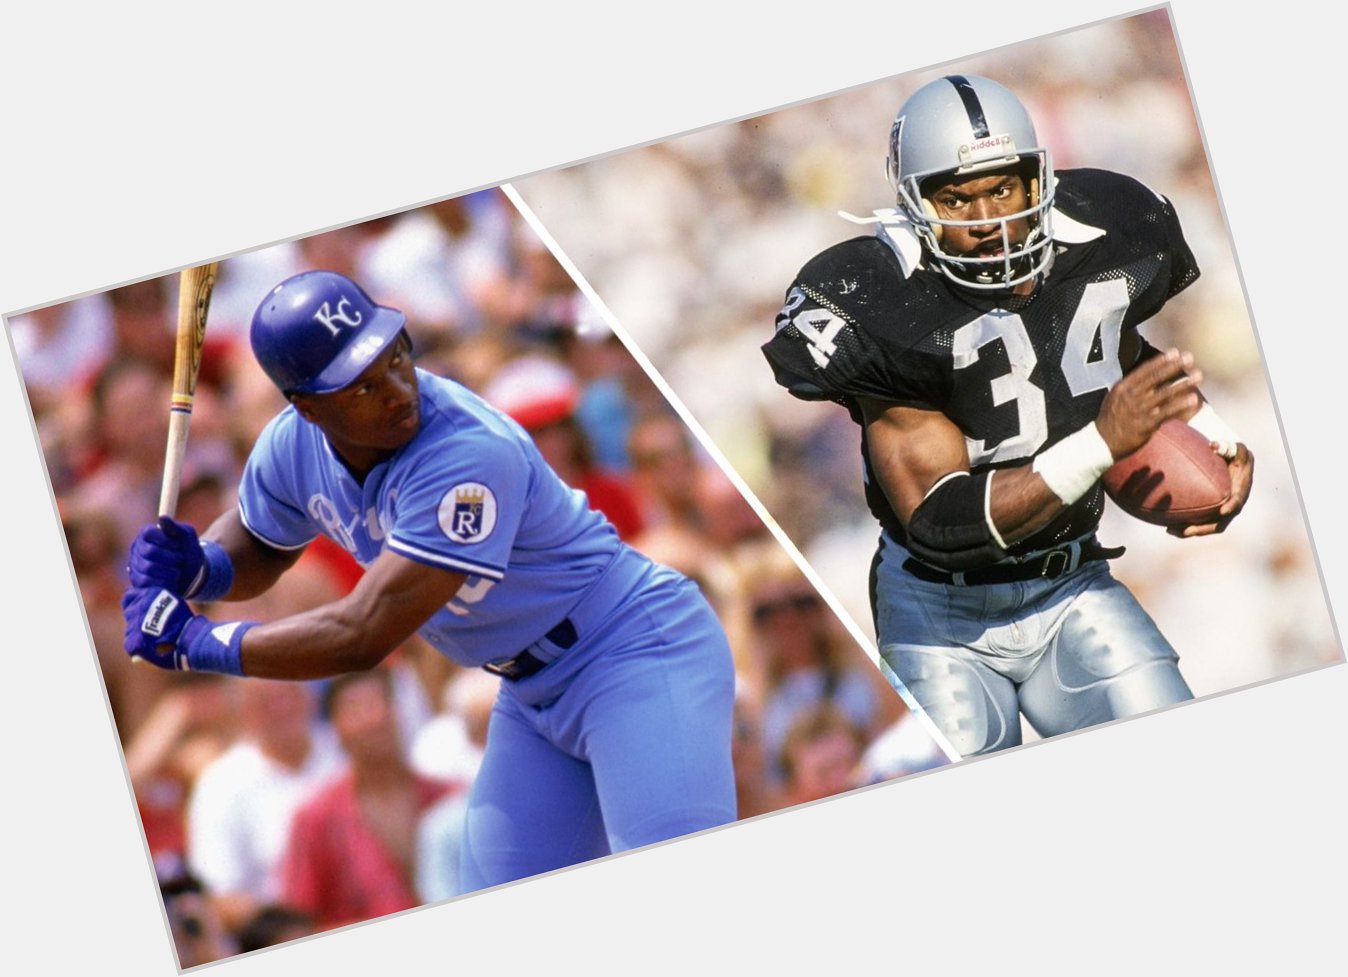 Happy 55th Birthday to one of the greatest athletes of all time, Bo Jackson. 